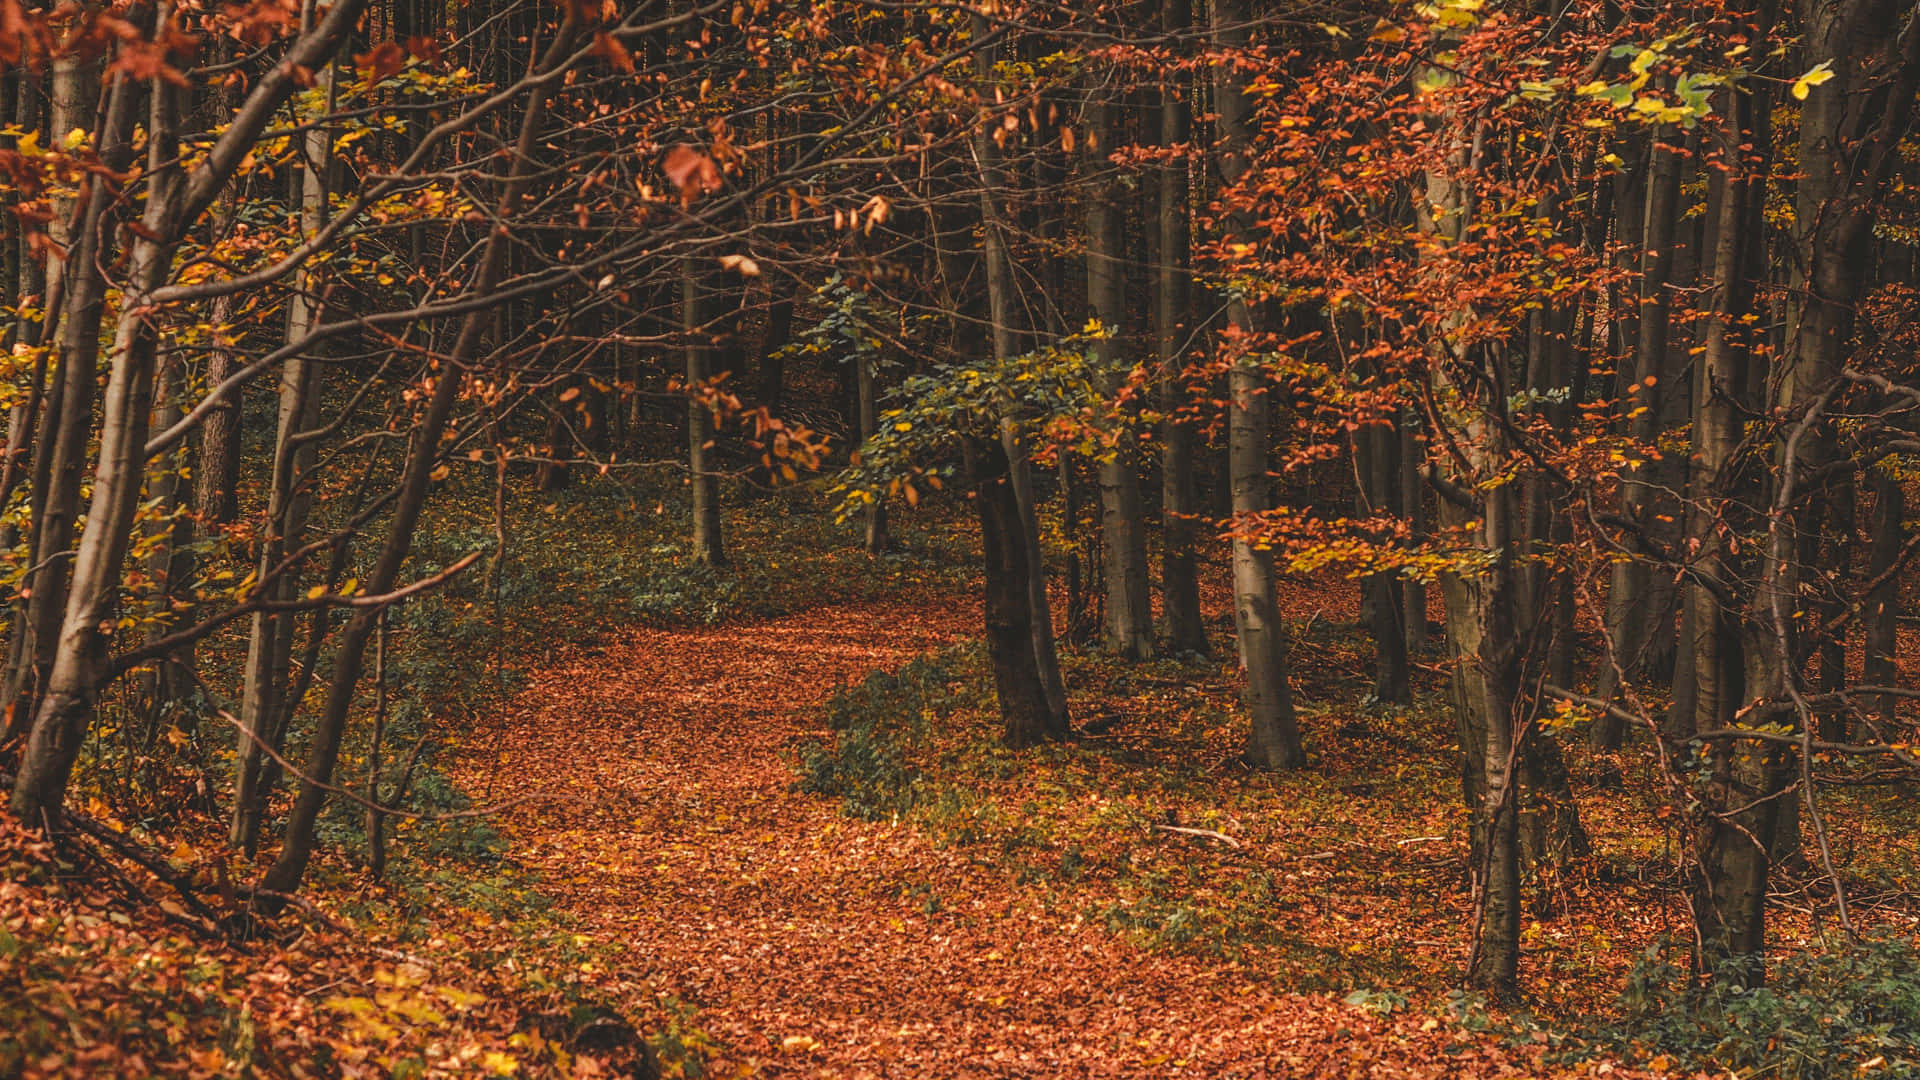 Enchanting Autumn Trail in the Forest Wallpaper